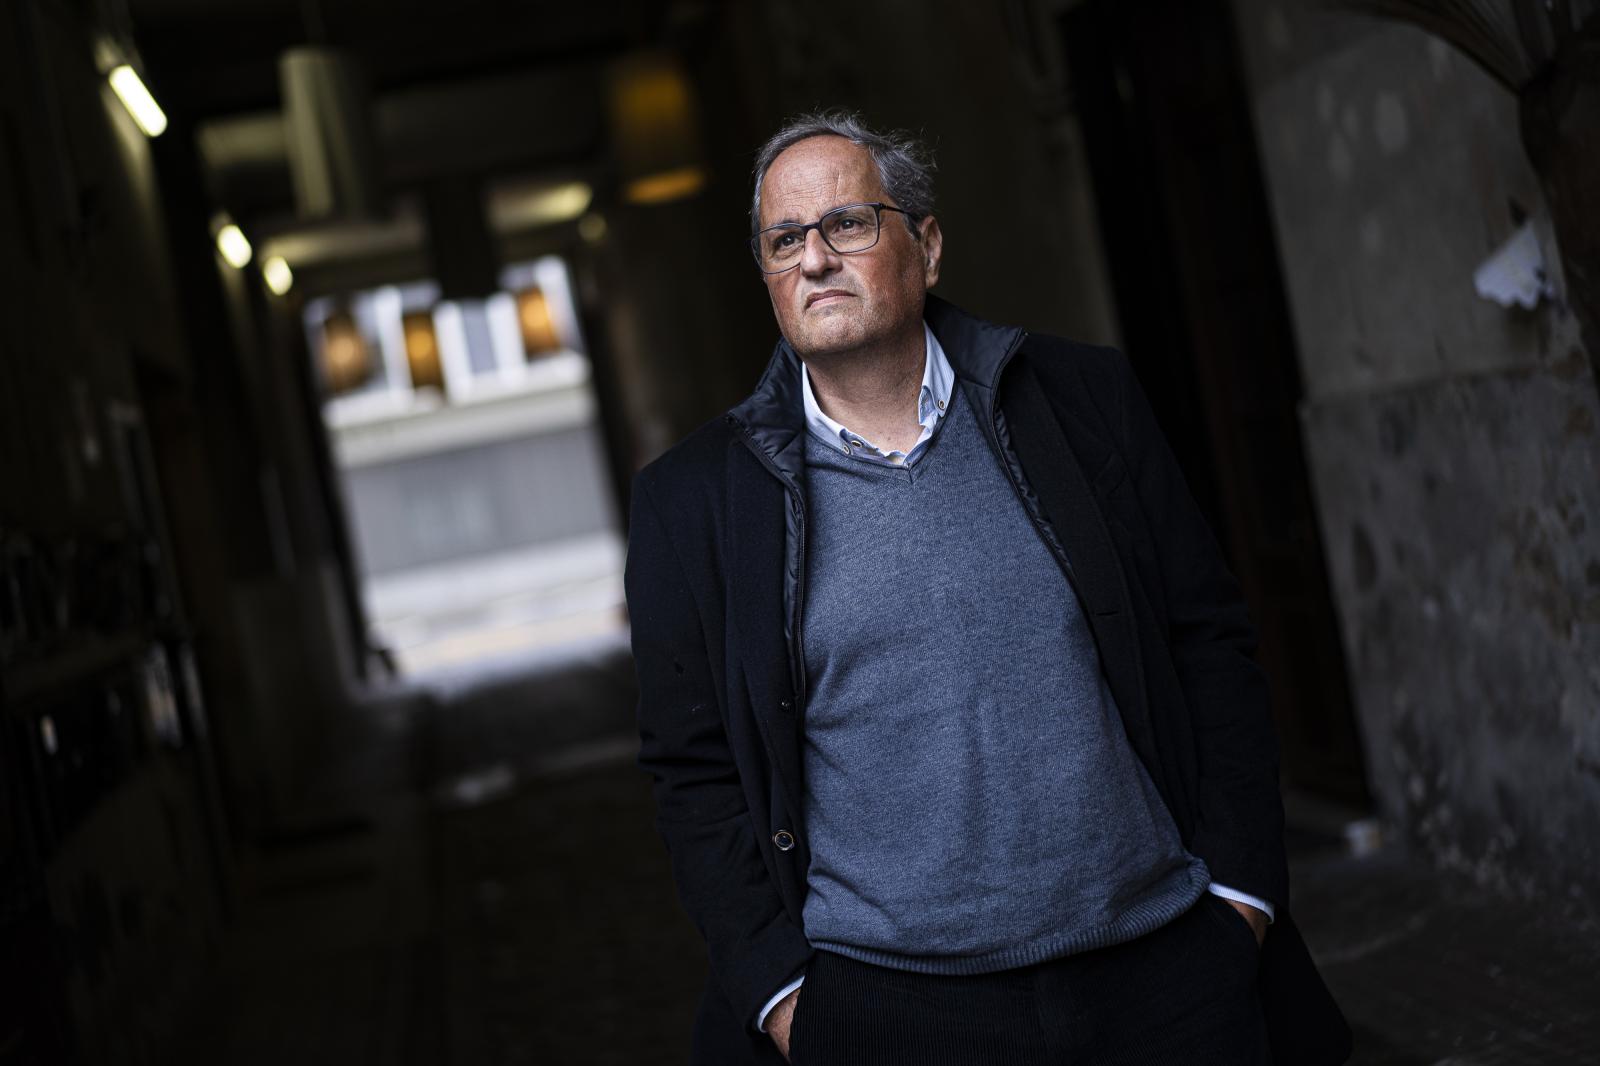 PORTRAITS - Quim Torra is a Catalan politician, lawyer, editor and...